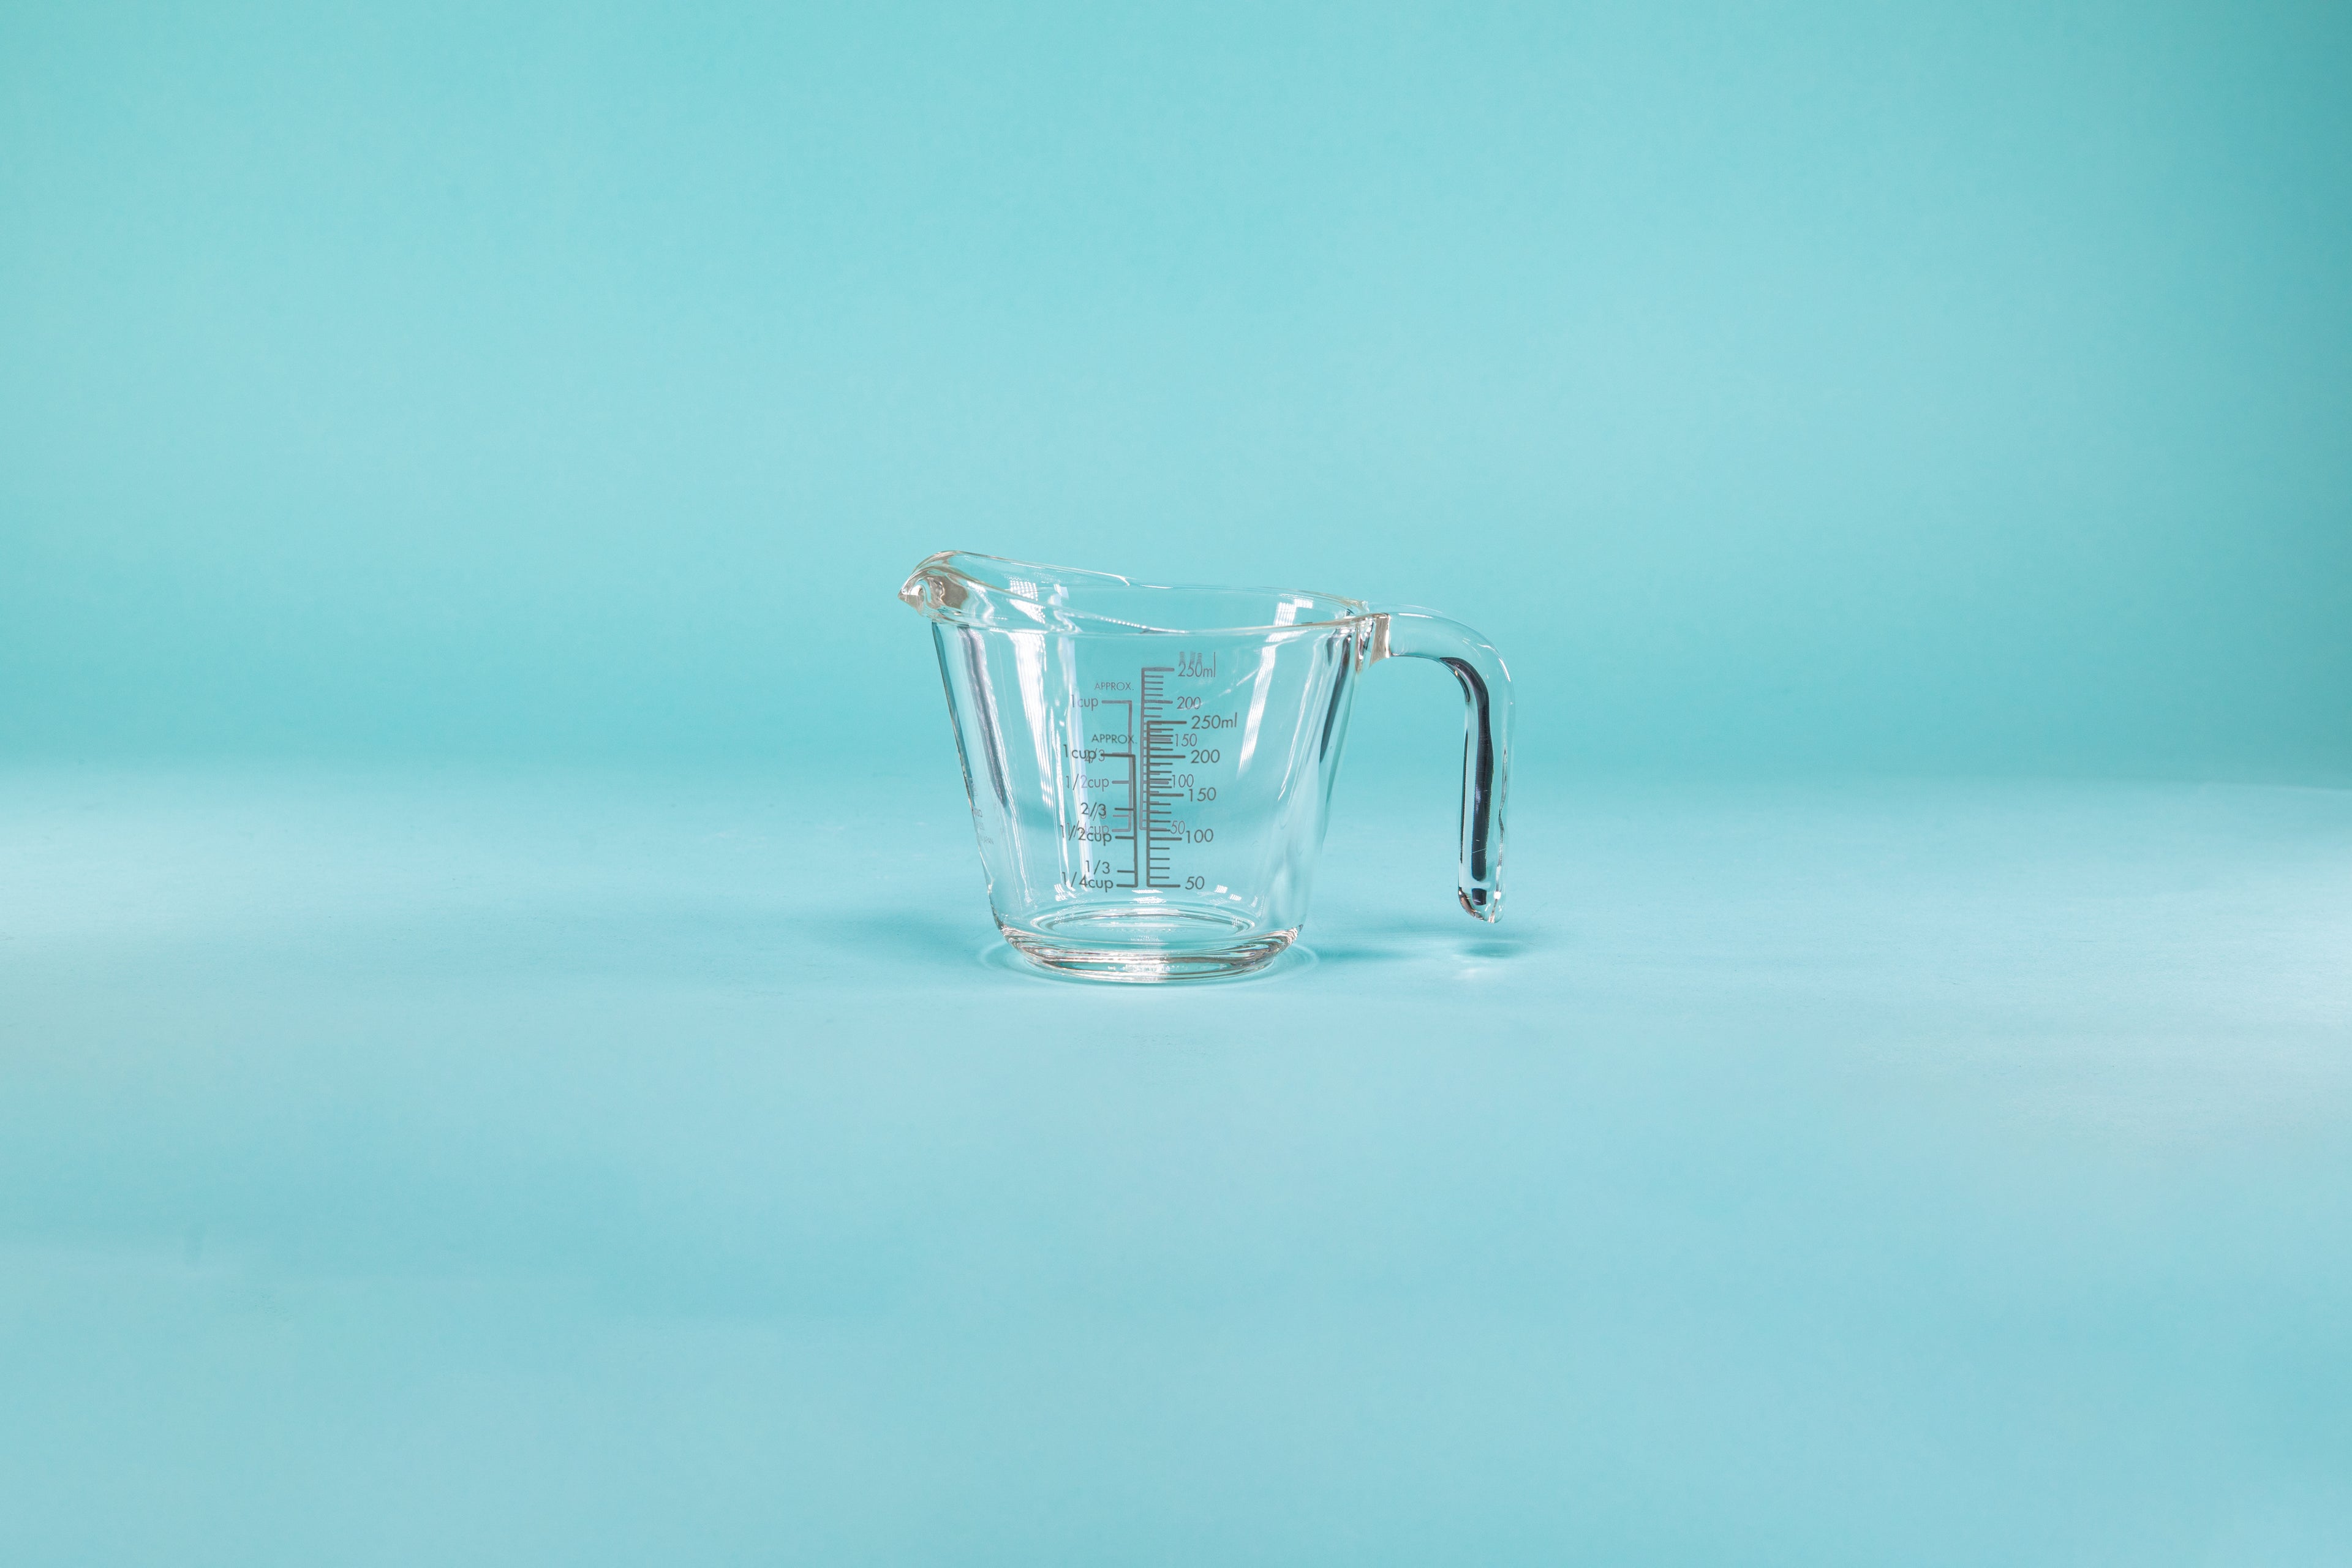 Thick glass measuring cup with glass handle and measurements on both the outside and inside of the glass.